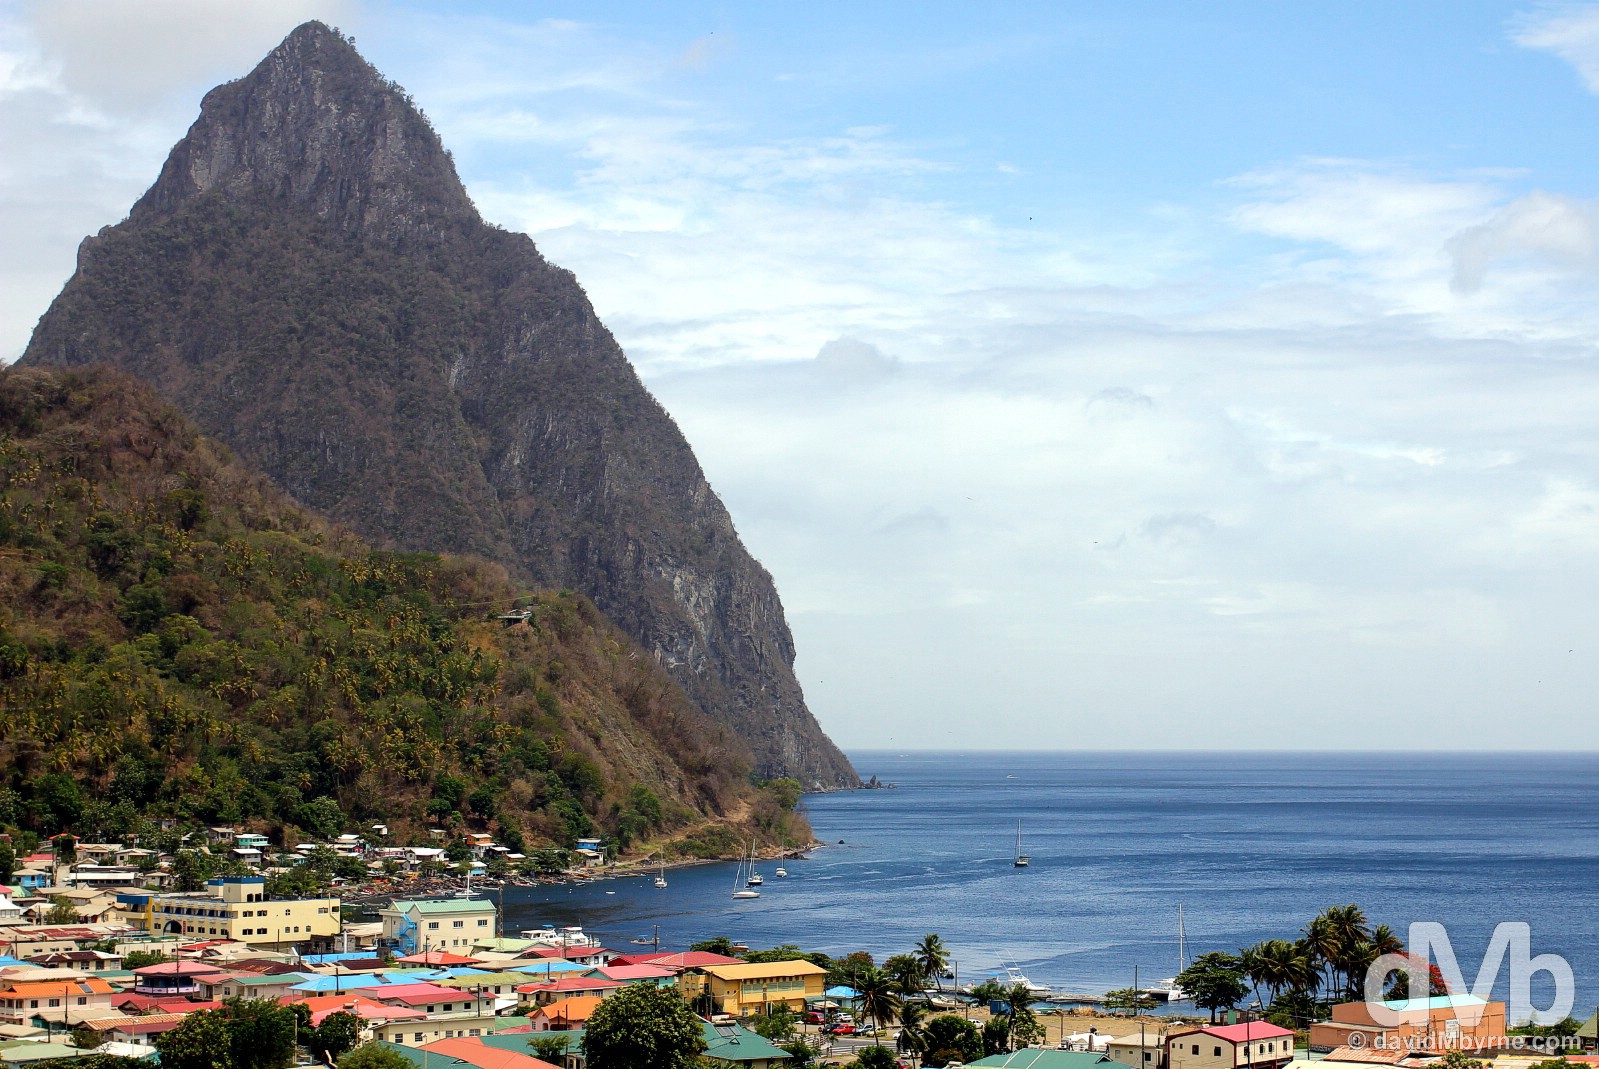 Petit Piton & the town of Soufriere in southeastern St. Lucia, Lesser Antilles. June 15, 2015.